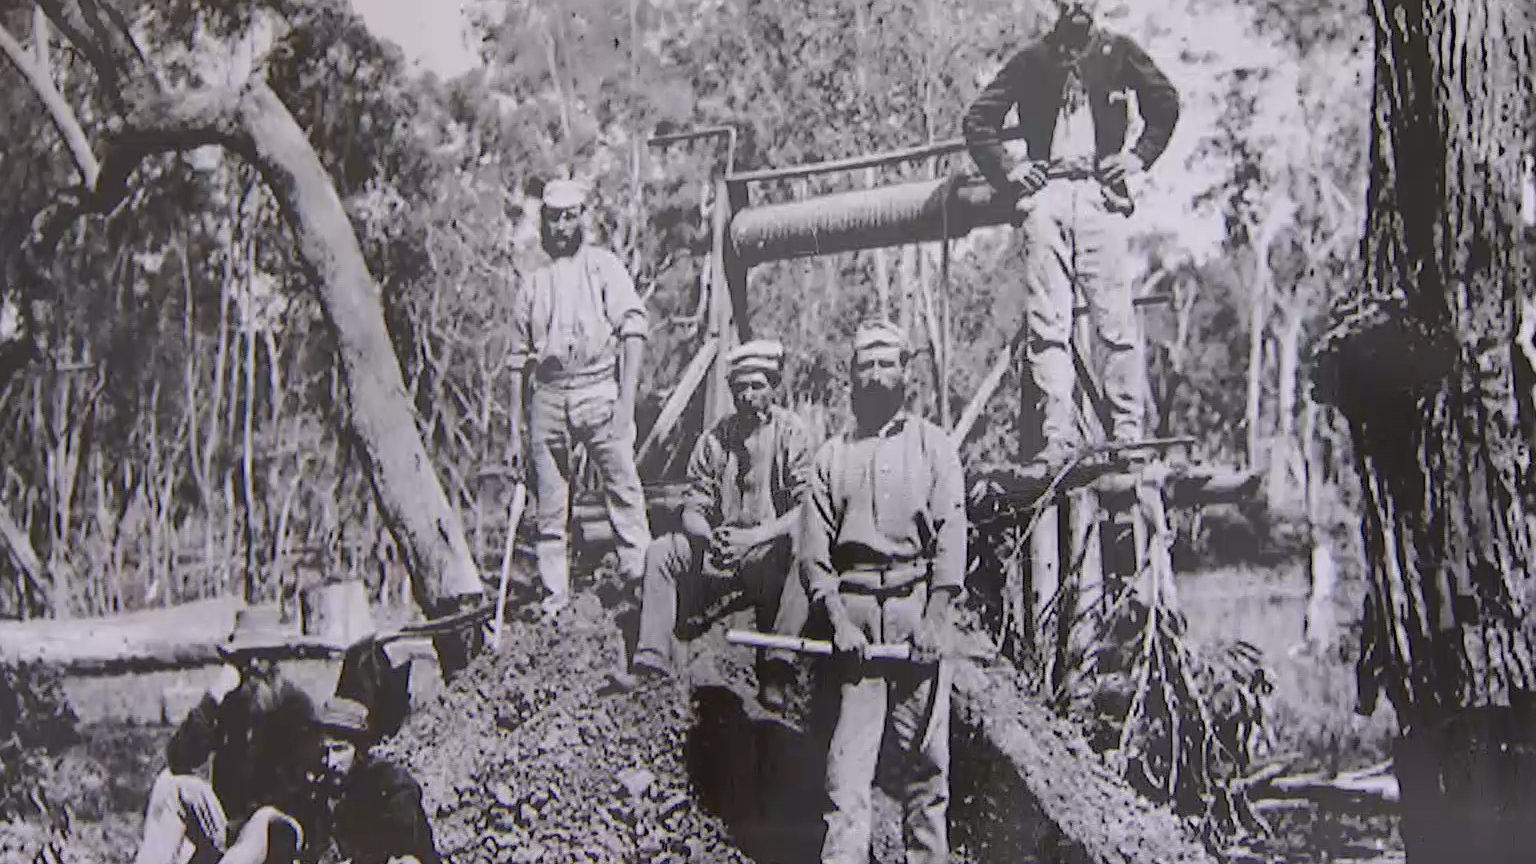 Clunes' rich Gold Rush history